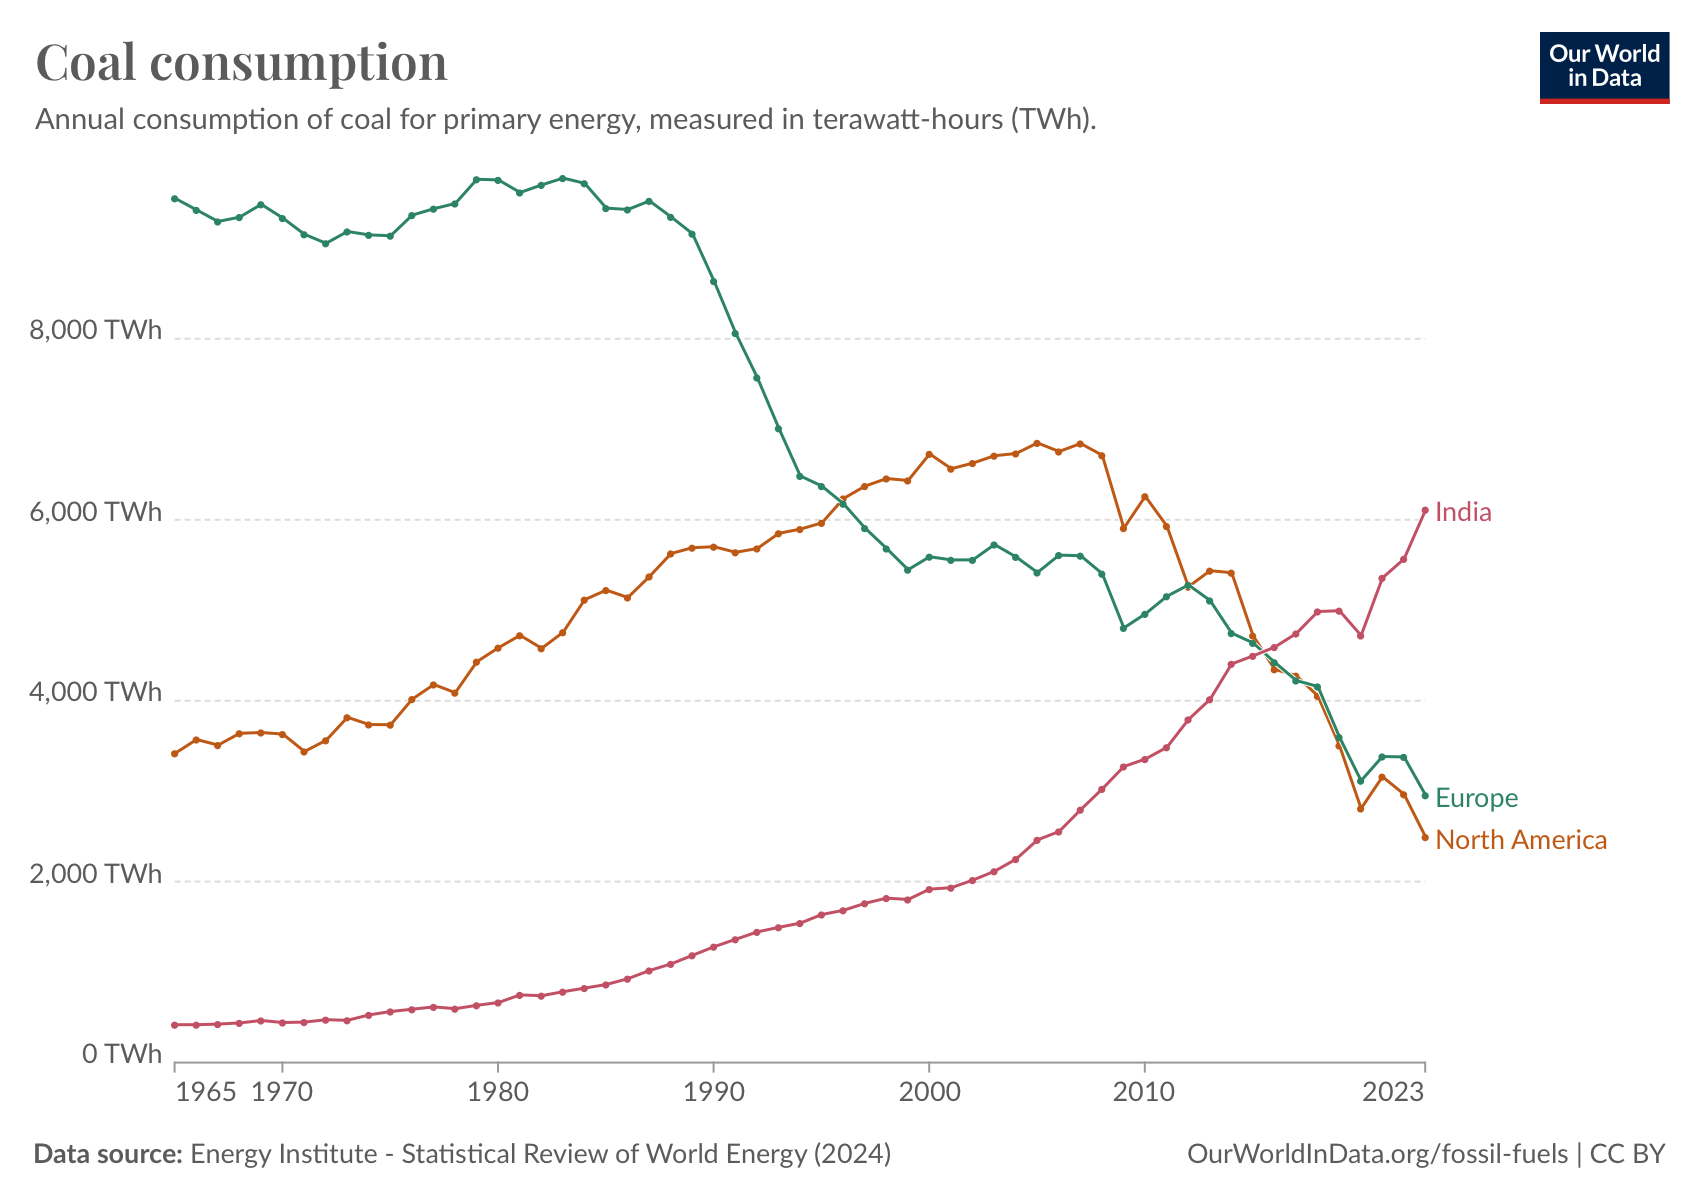 A line chart titled “Coal consumption” shows the coal consumption measured in terawatt-hours (TWh), from 1965 to 2023. The chart features three lines representing India, Europe, and North America. India’s coal consumption (pink line) shows a continuous rise, significantly increasing since 2000. Europe’s coal consumption (green line) peaks around 1985 and then steadily declines. North America’s coal consumption (orange line) peaks in the late 2000s before declining sharply. The data source is the Energy Institute - Statistical Review of World Energy (2024). The chart is from Our World in Data.